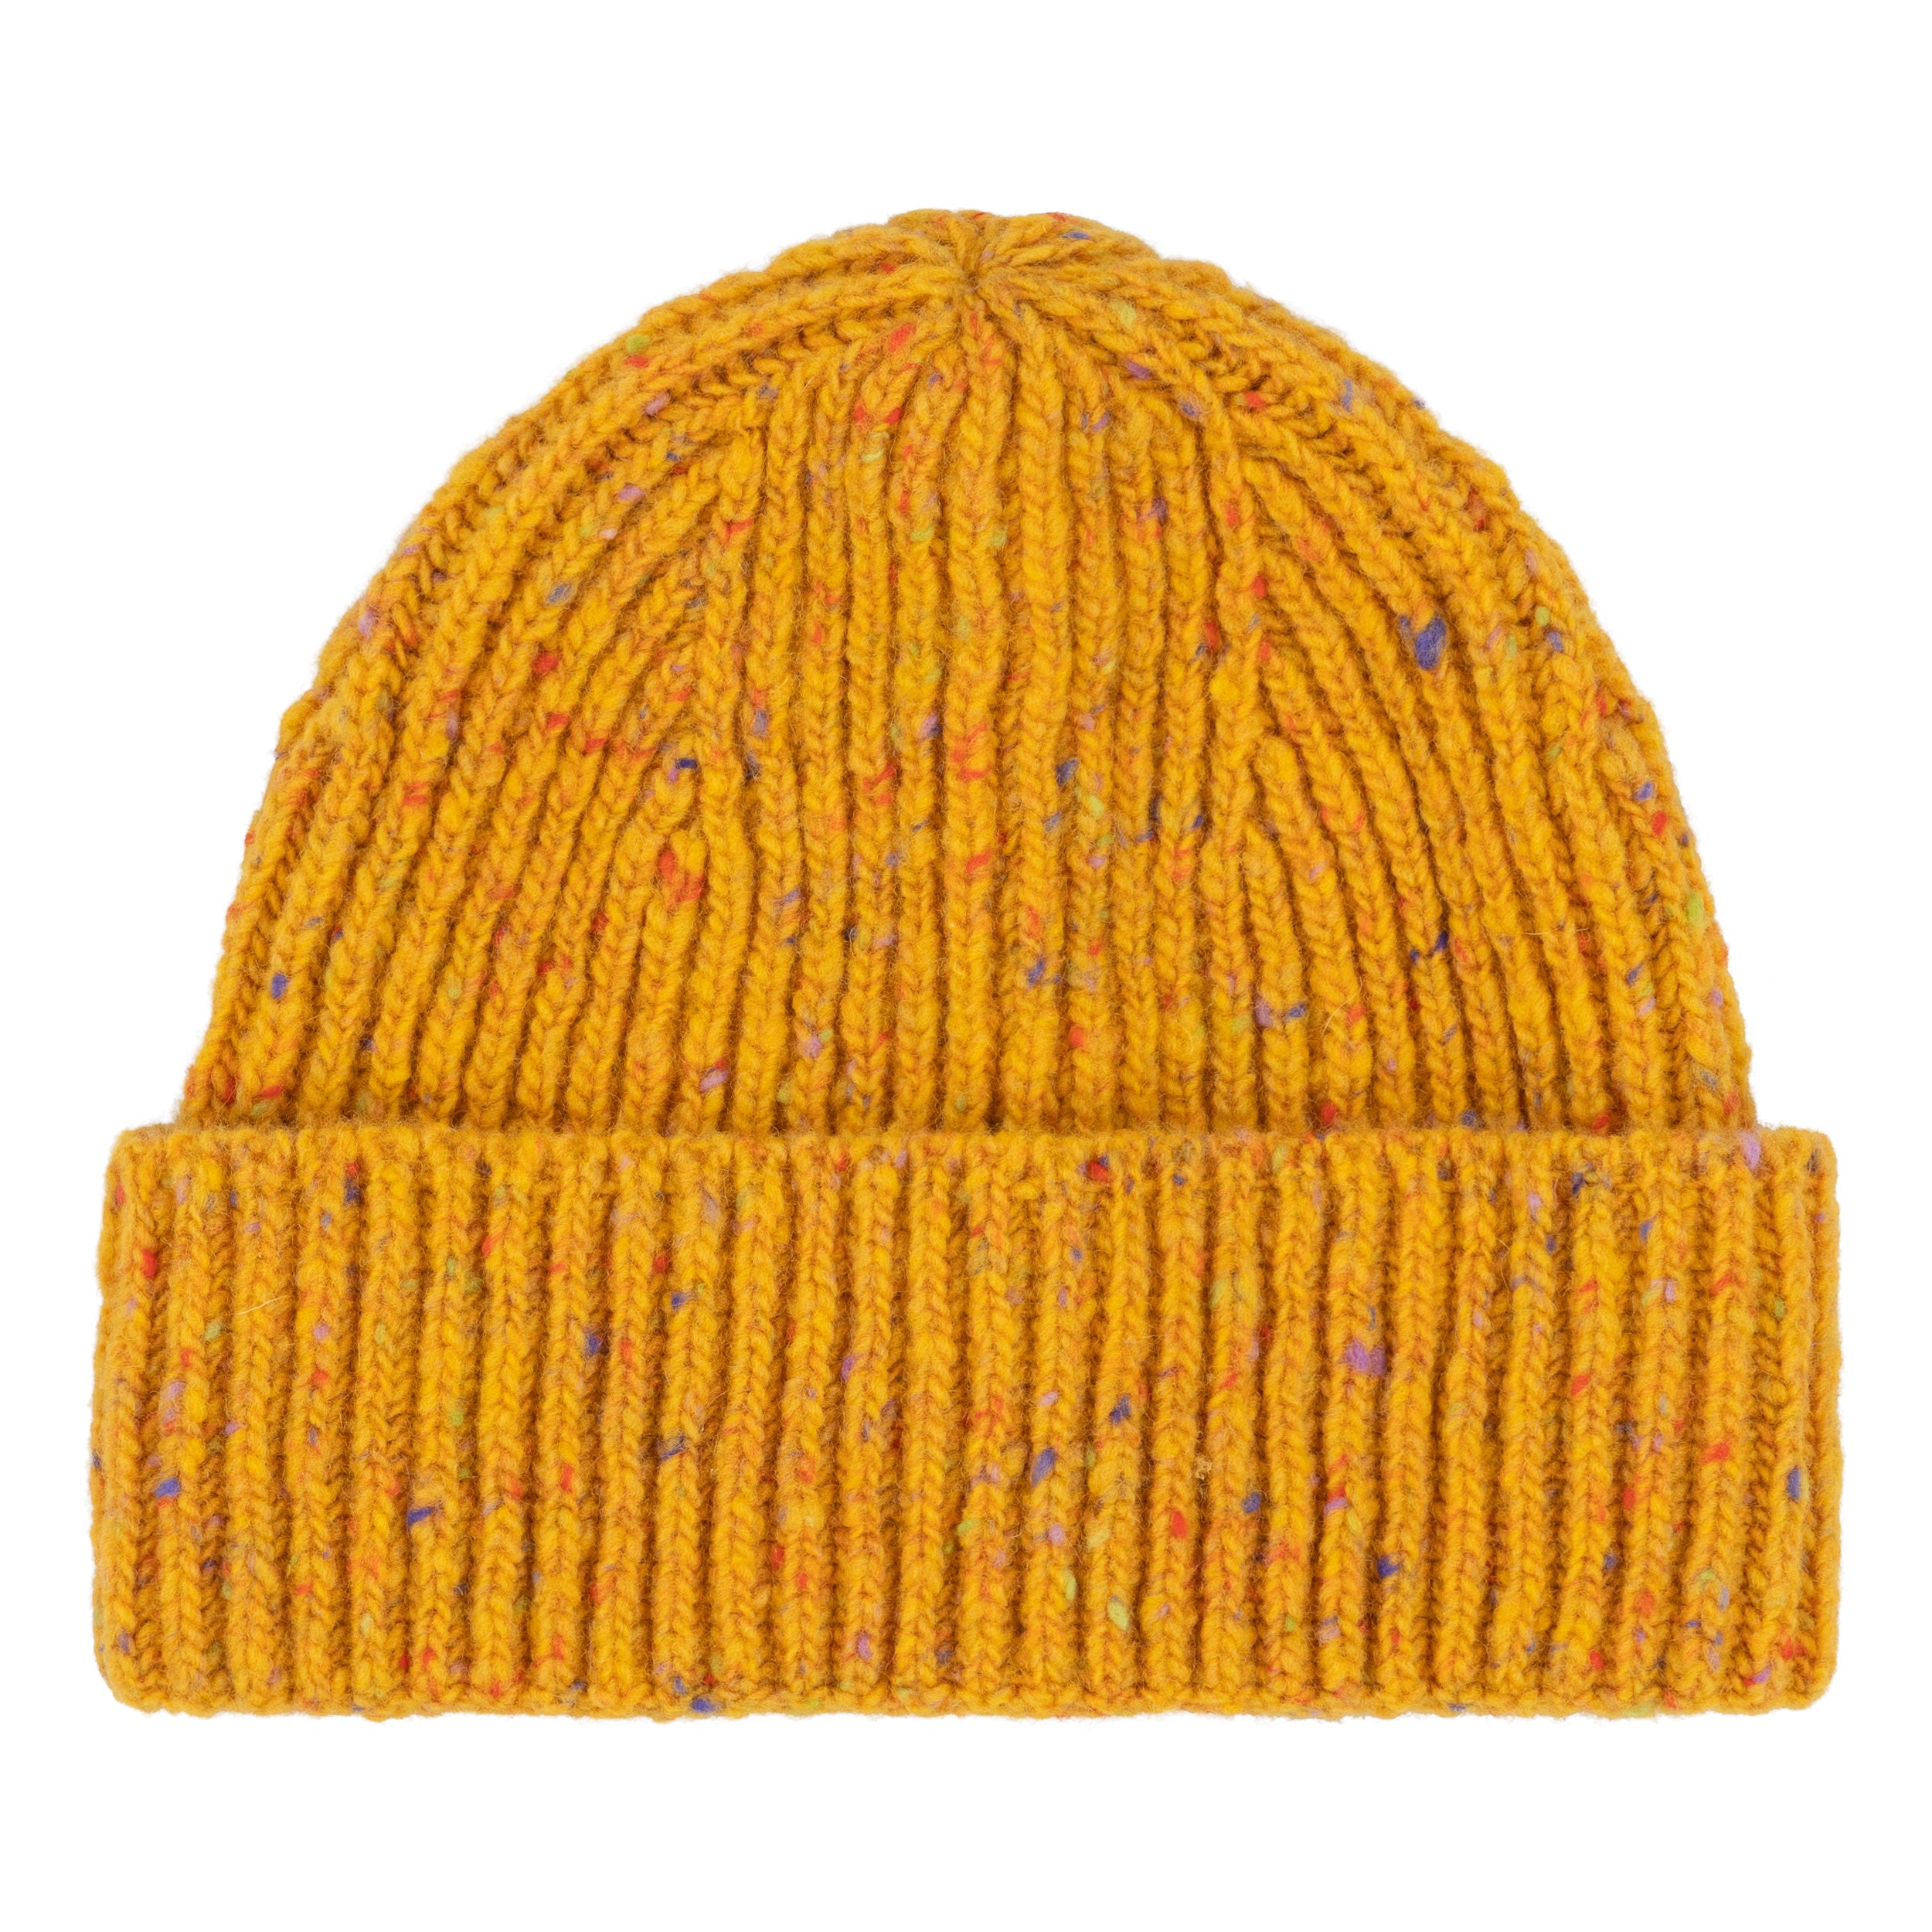 Carrier Company Donegal Wool Hat in Papaya